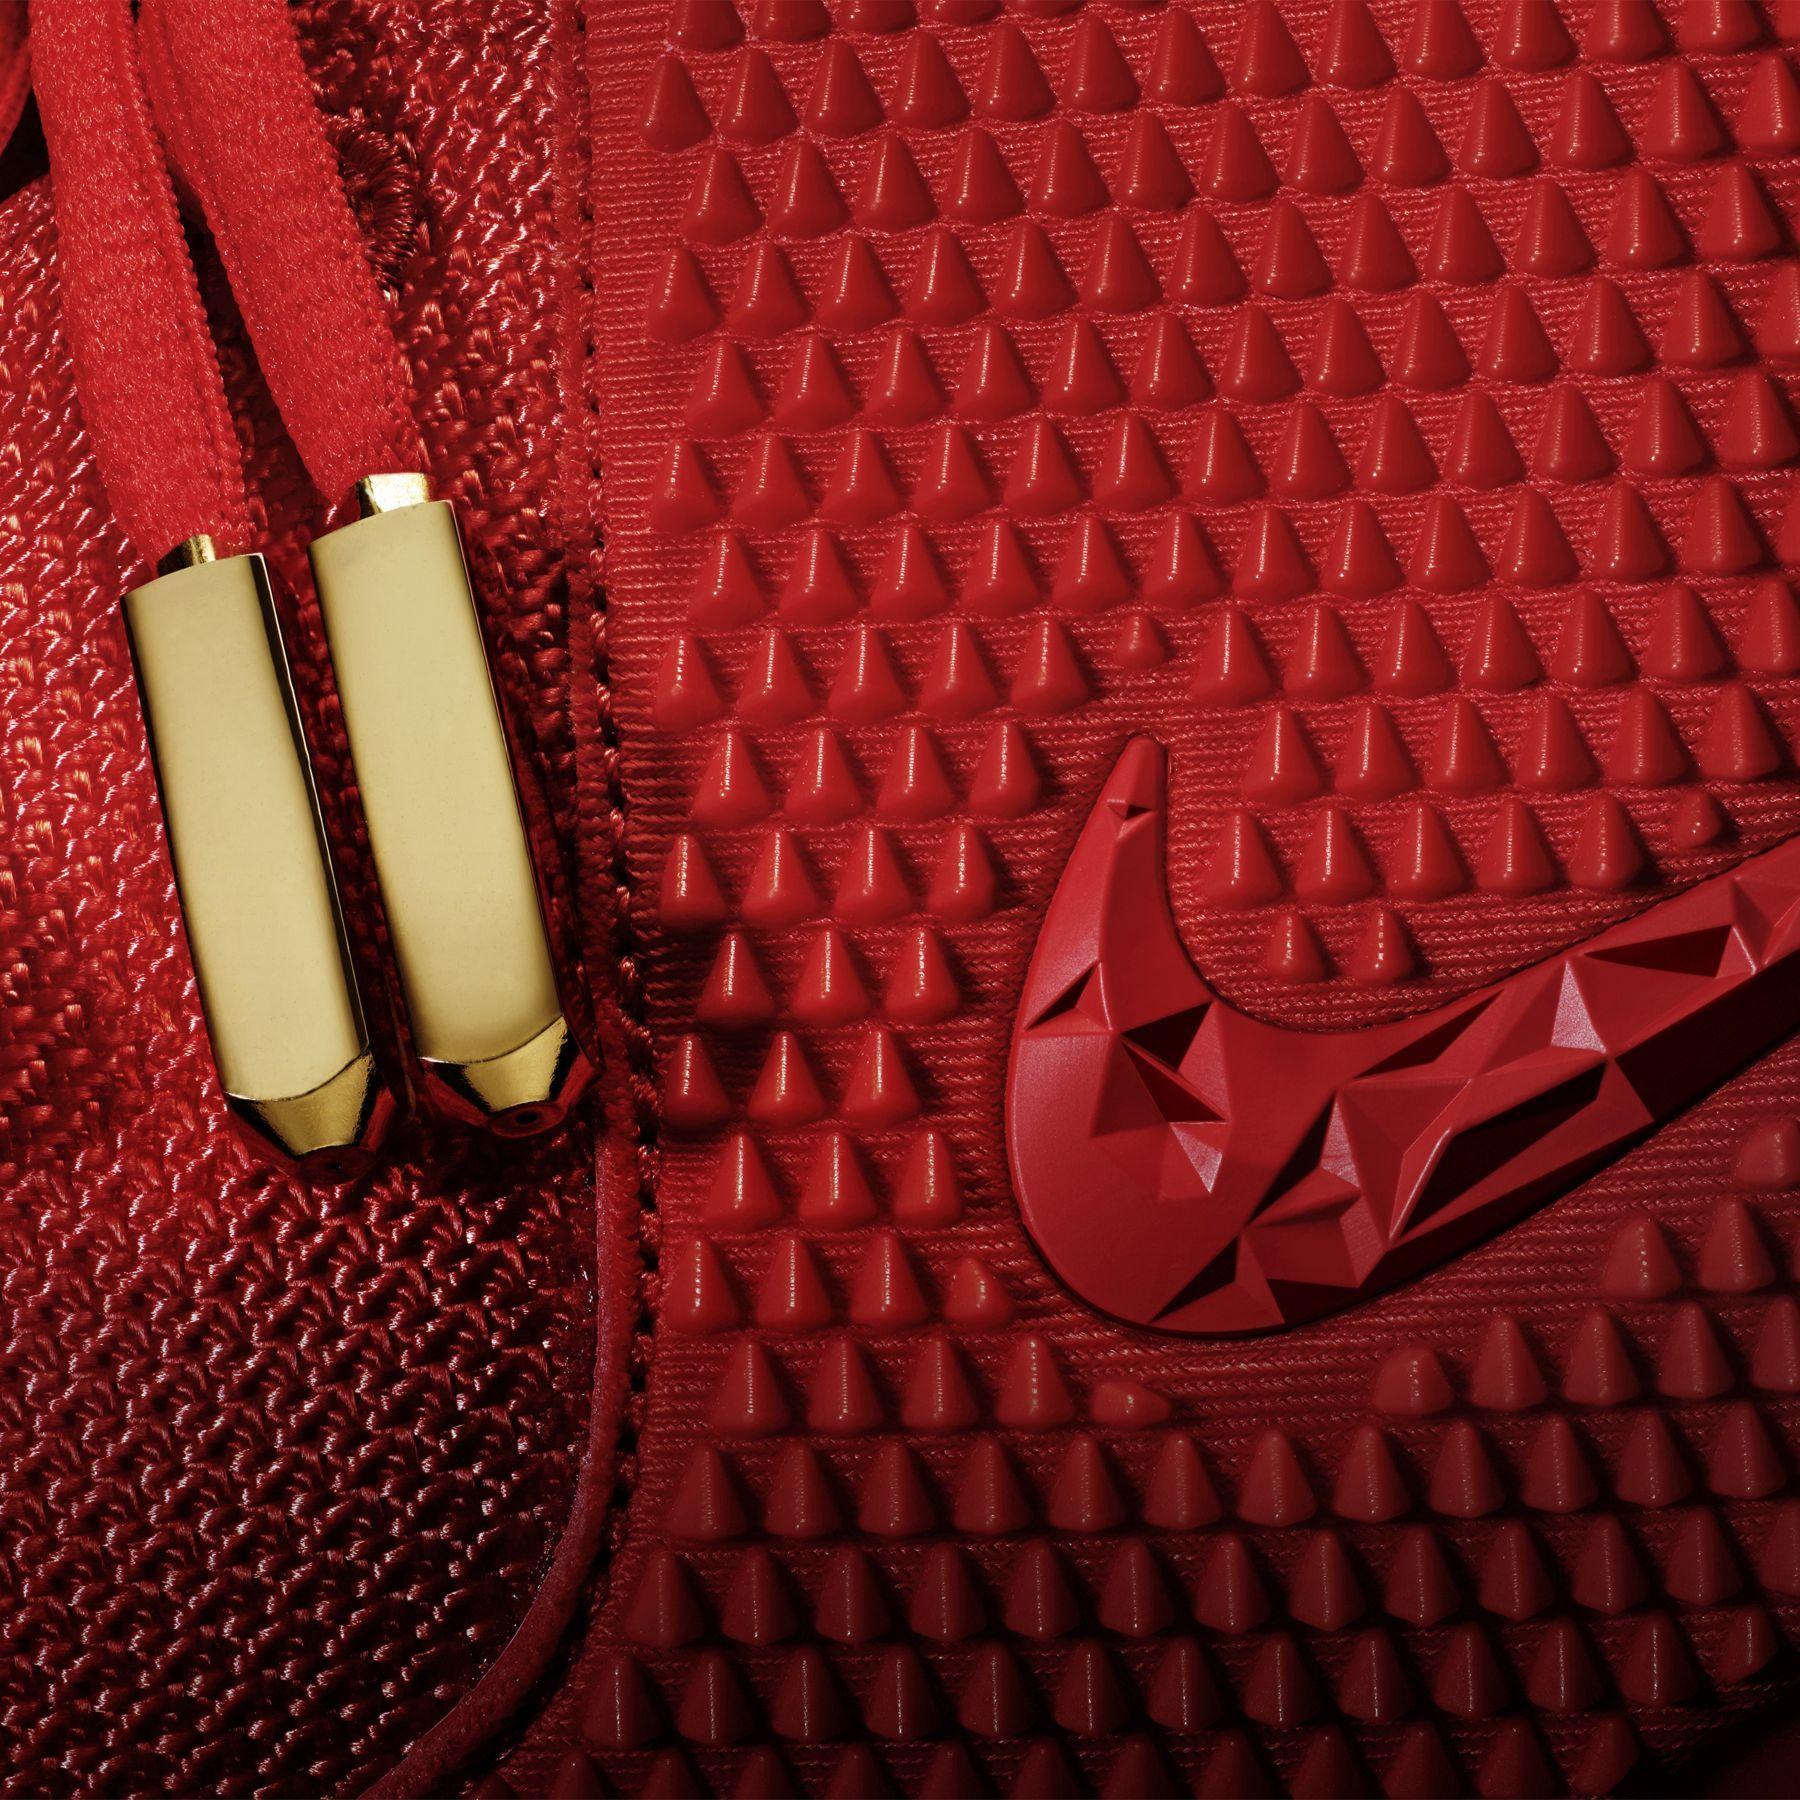 Red October Logo - Nike Air Yeezy 2 Red October